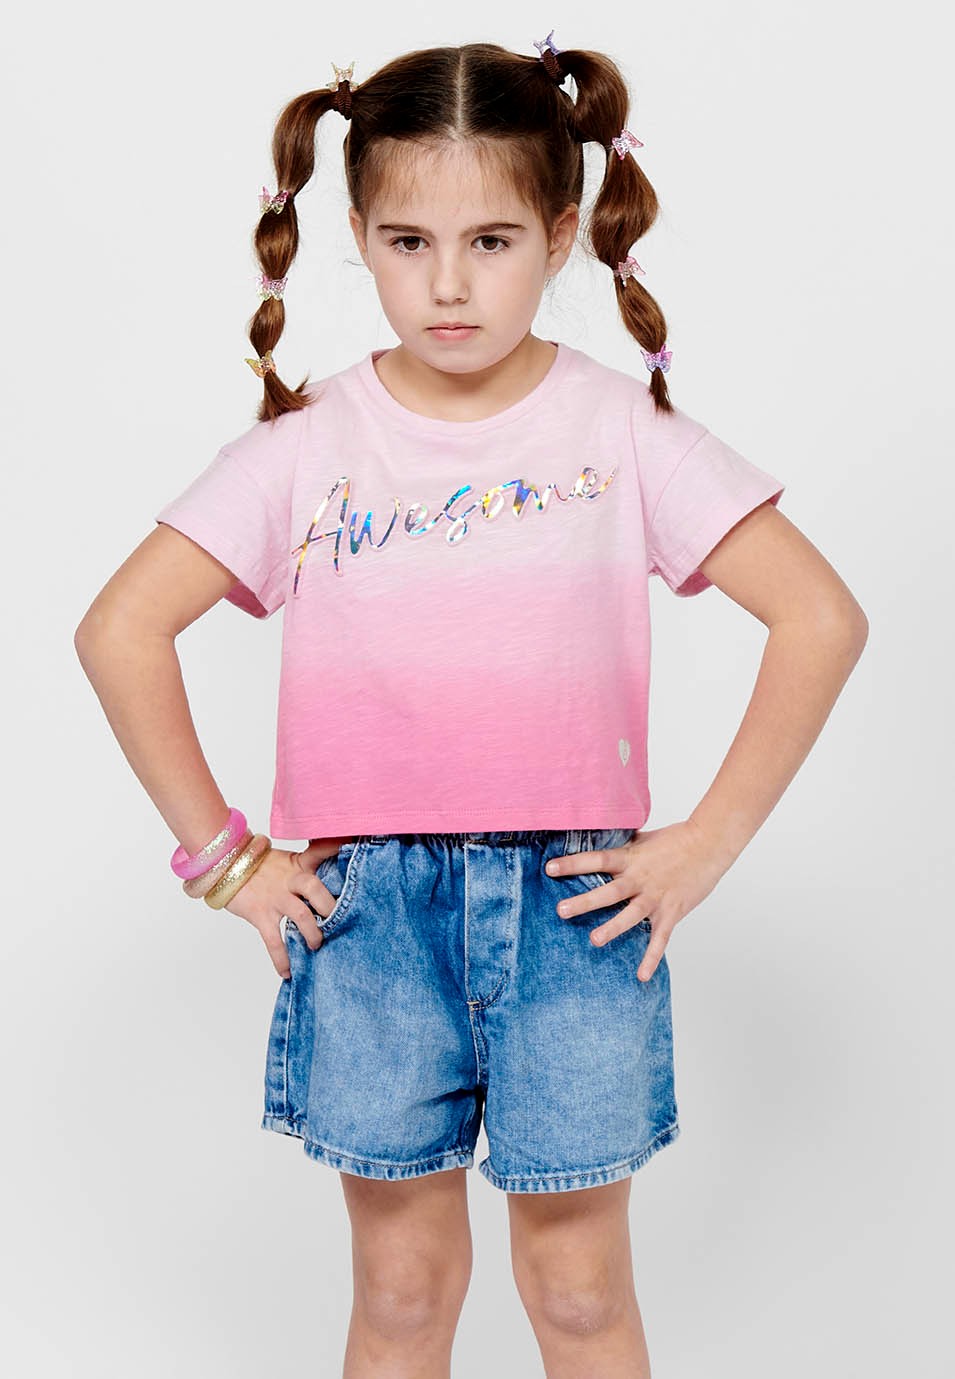 Short-sleeved T-shirt Cotton Top with Round Neck and Front Letters with Pink Volume for Girls 2